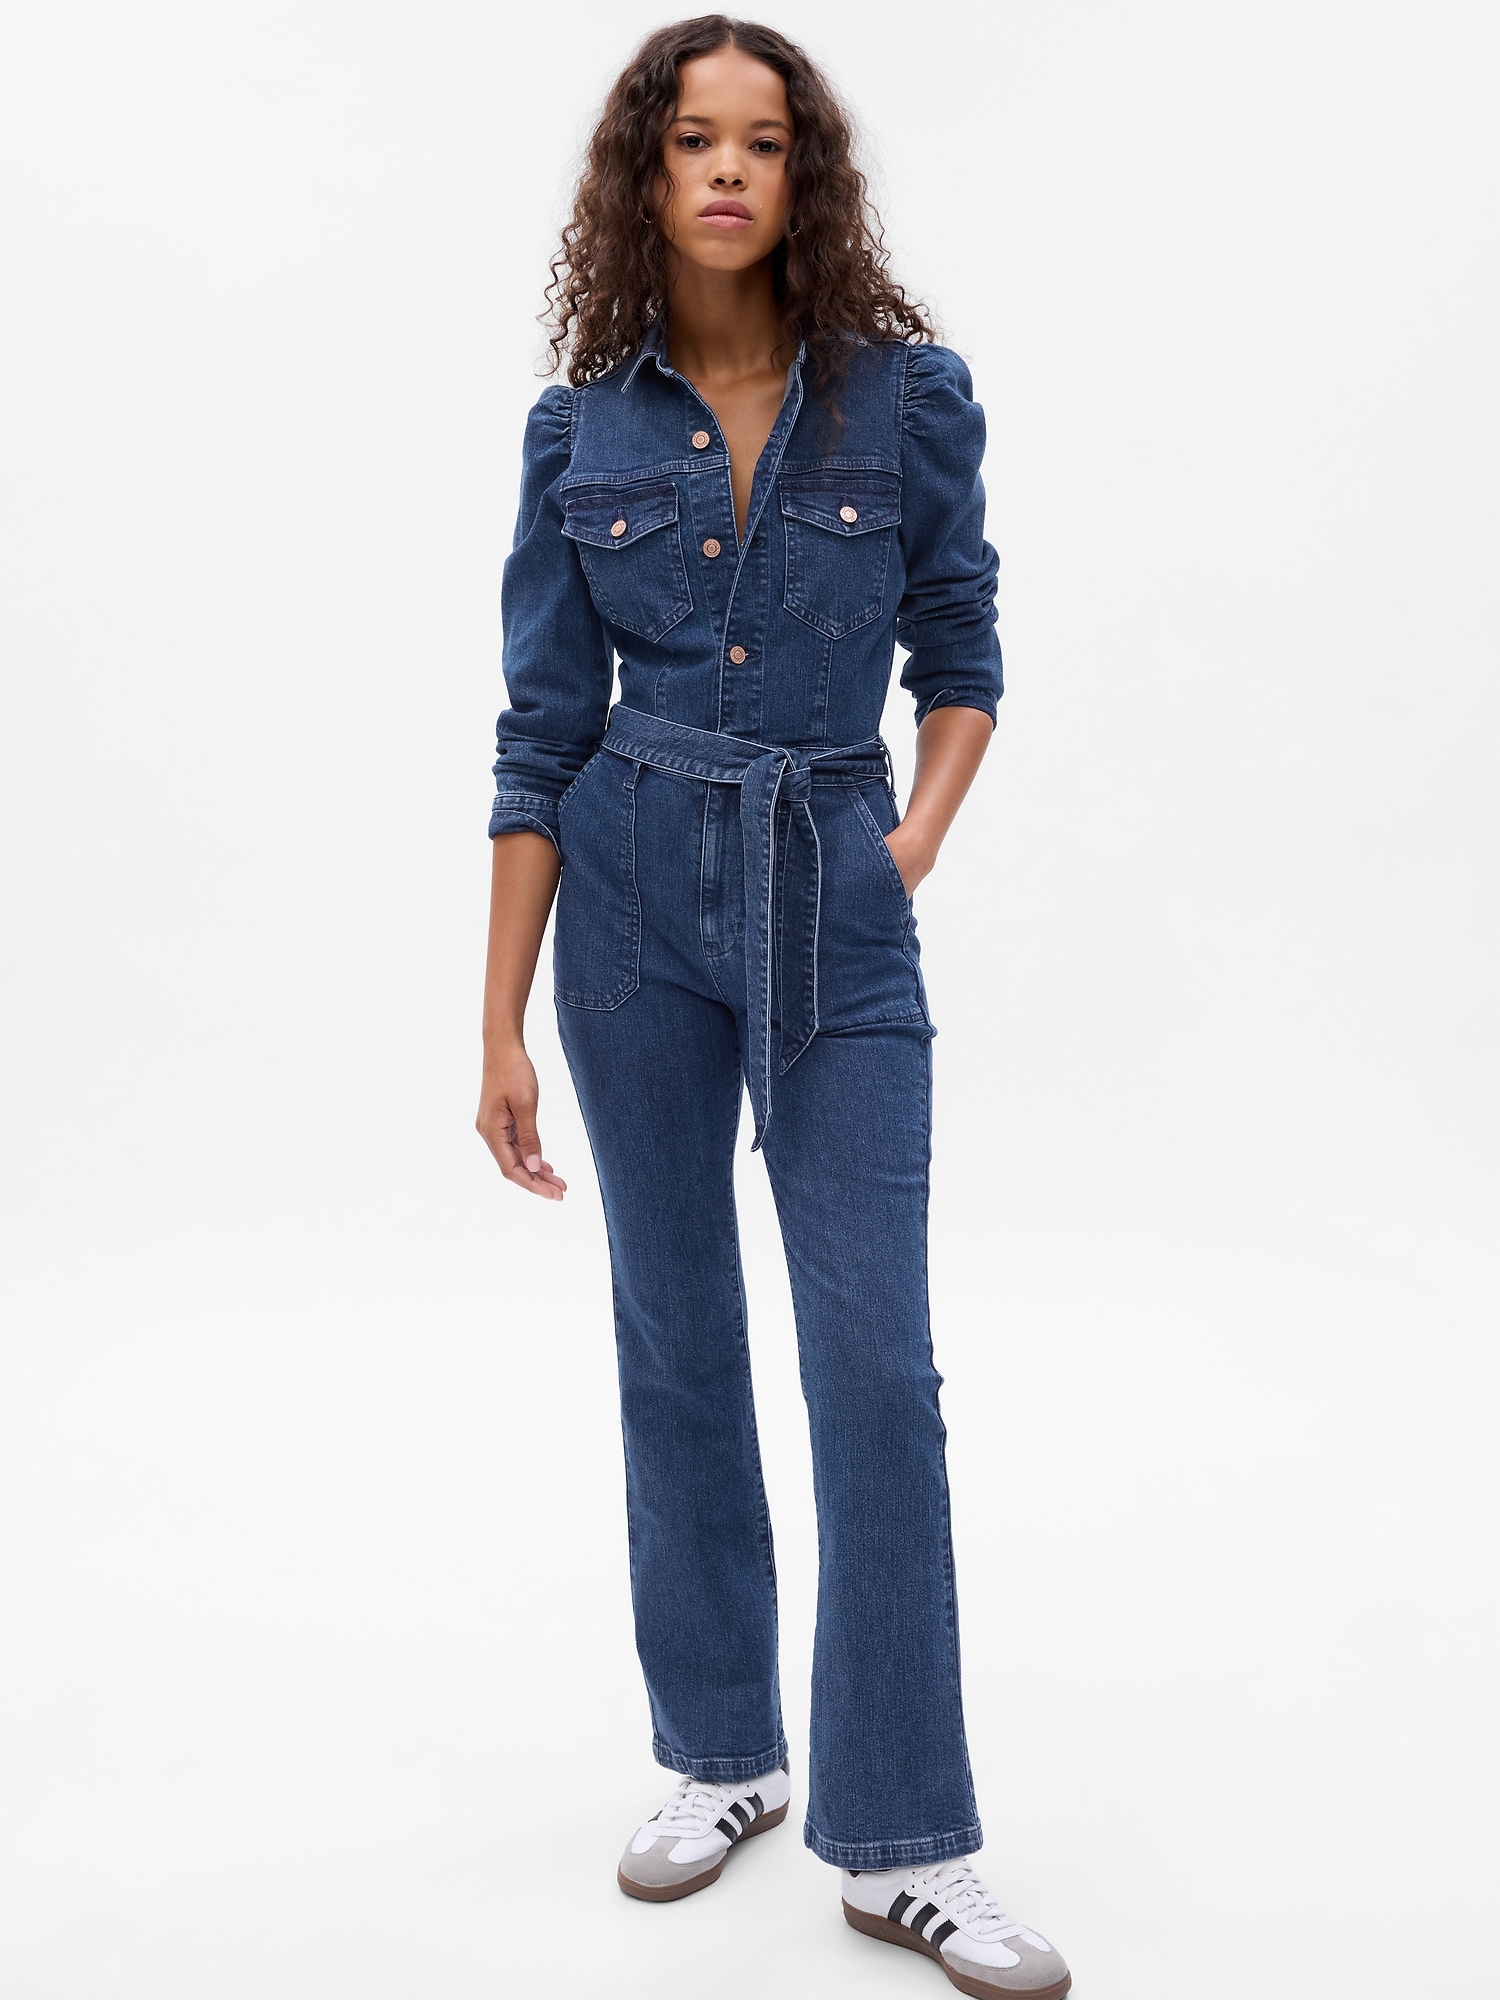 Denim Outfits for Women